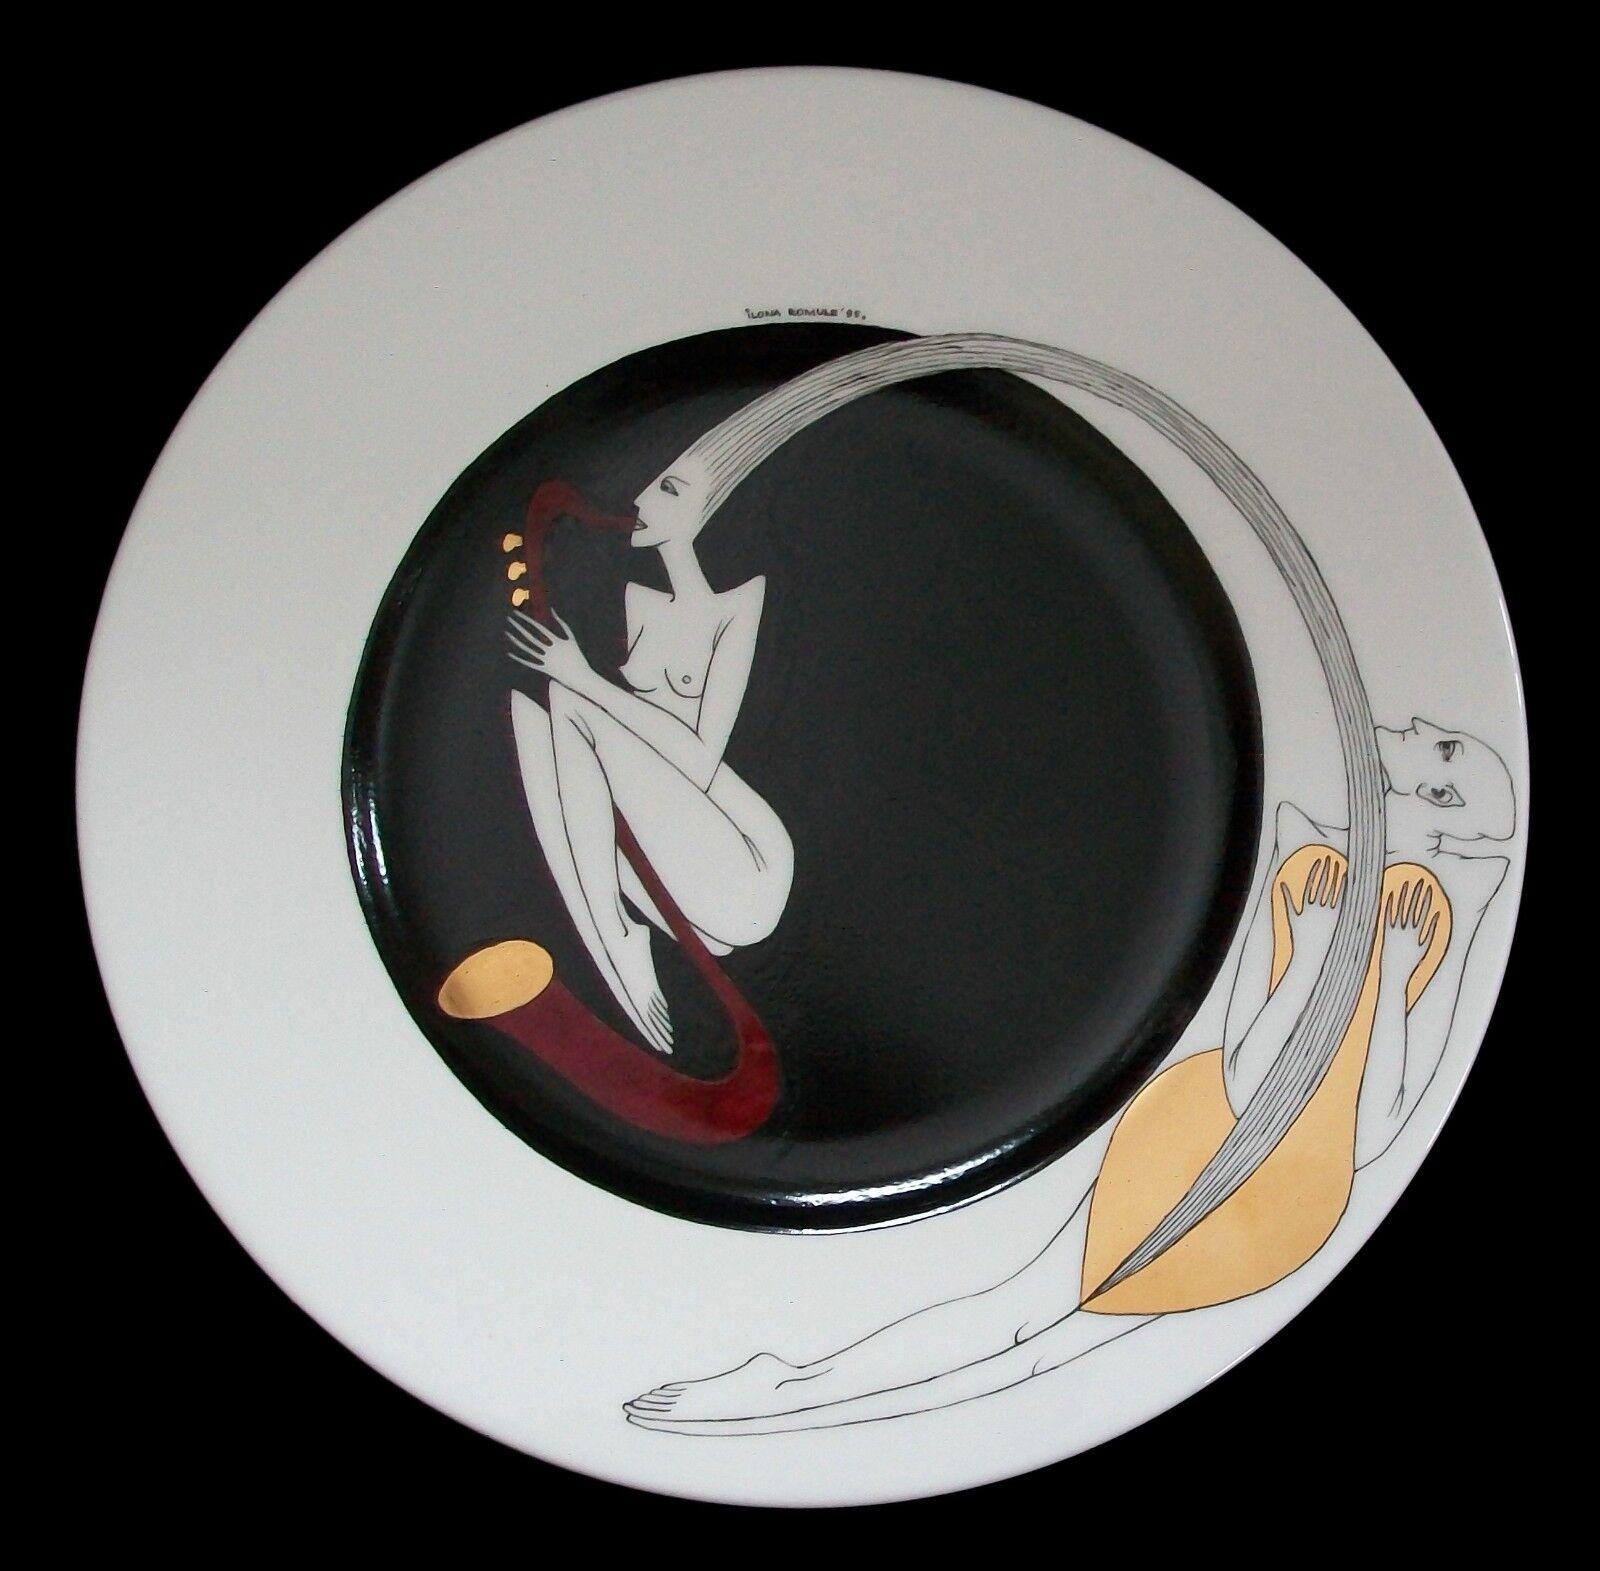 Ilona Romule - 'Sax' - Important studio ceramic semi-erotic porcelain plate - hand painted with gold details - signed and dated upper centre - Latvia - circa 1995. 

Excellent condition - no loss - no damage - no restoration - minor surface